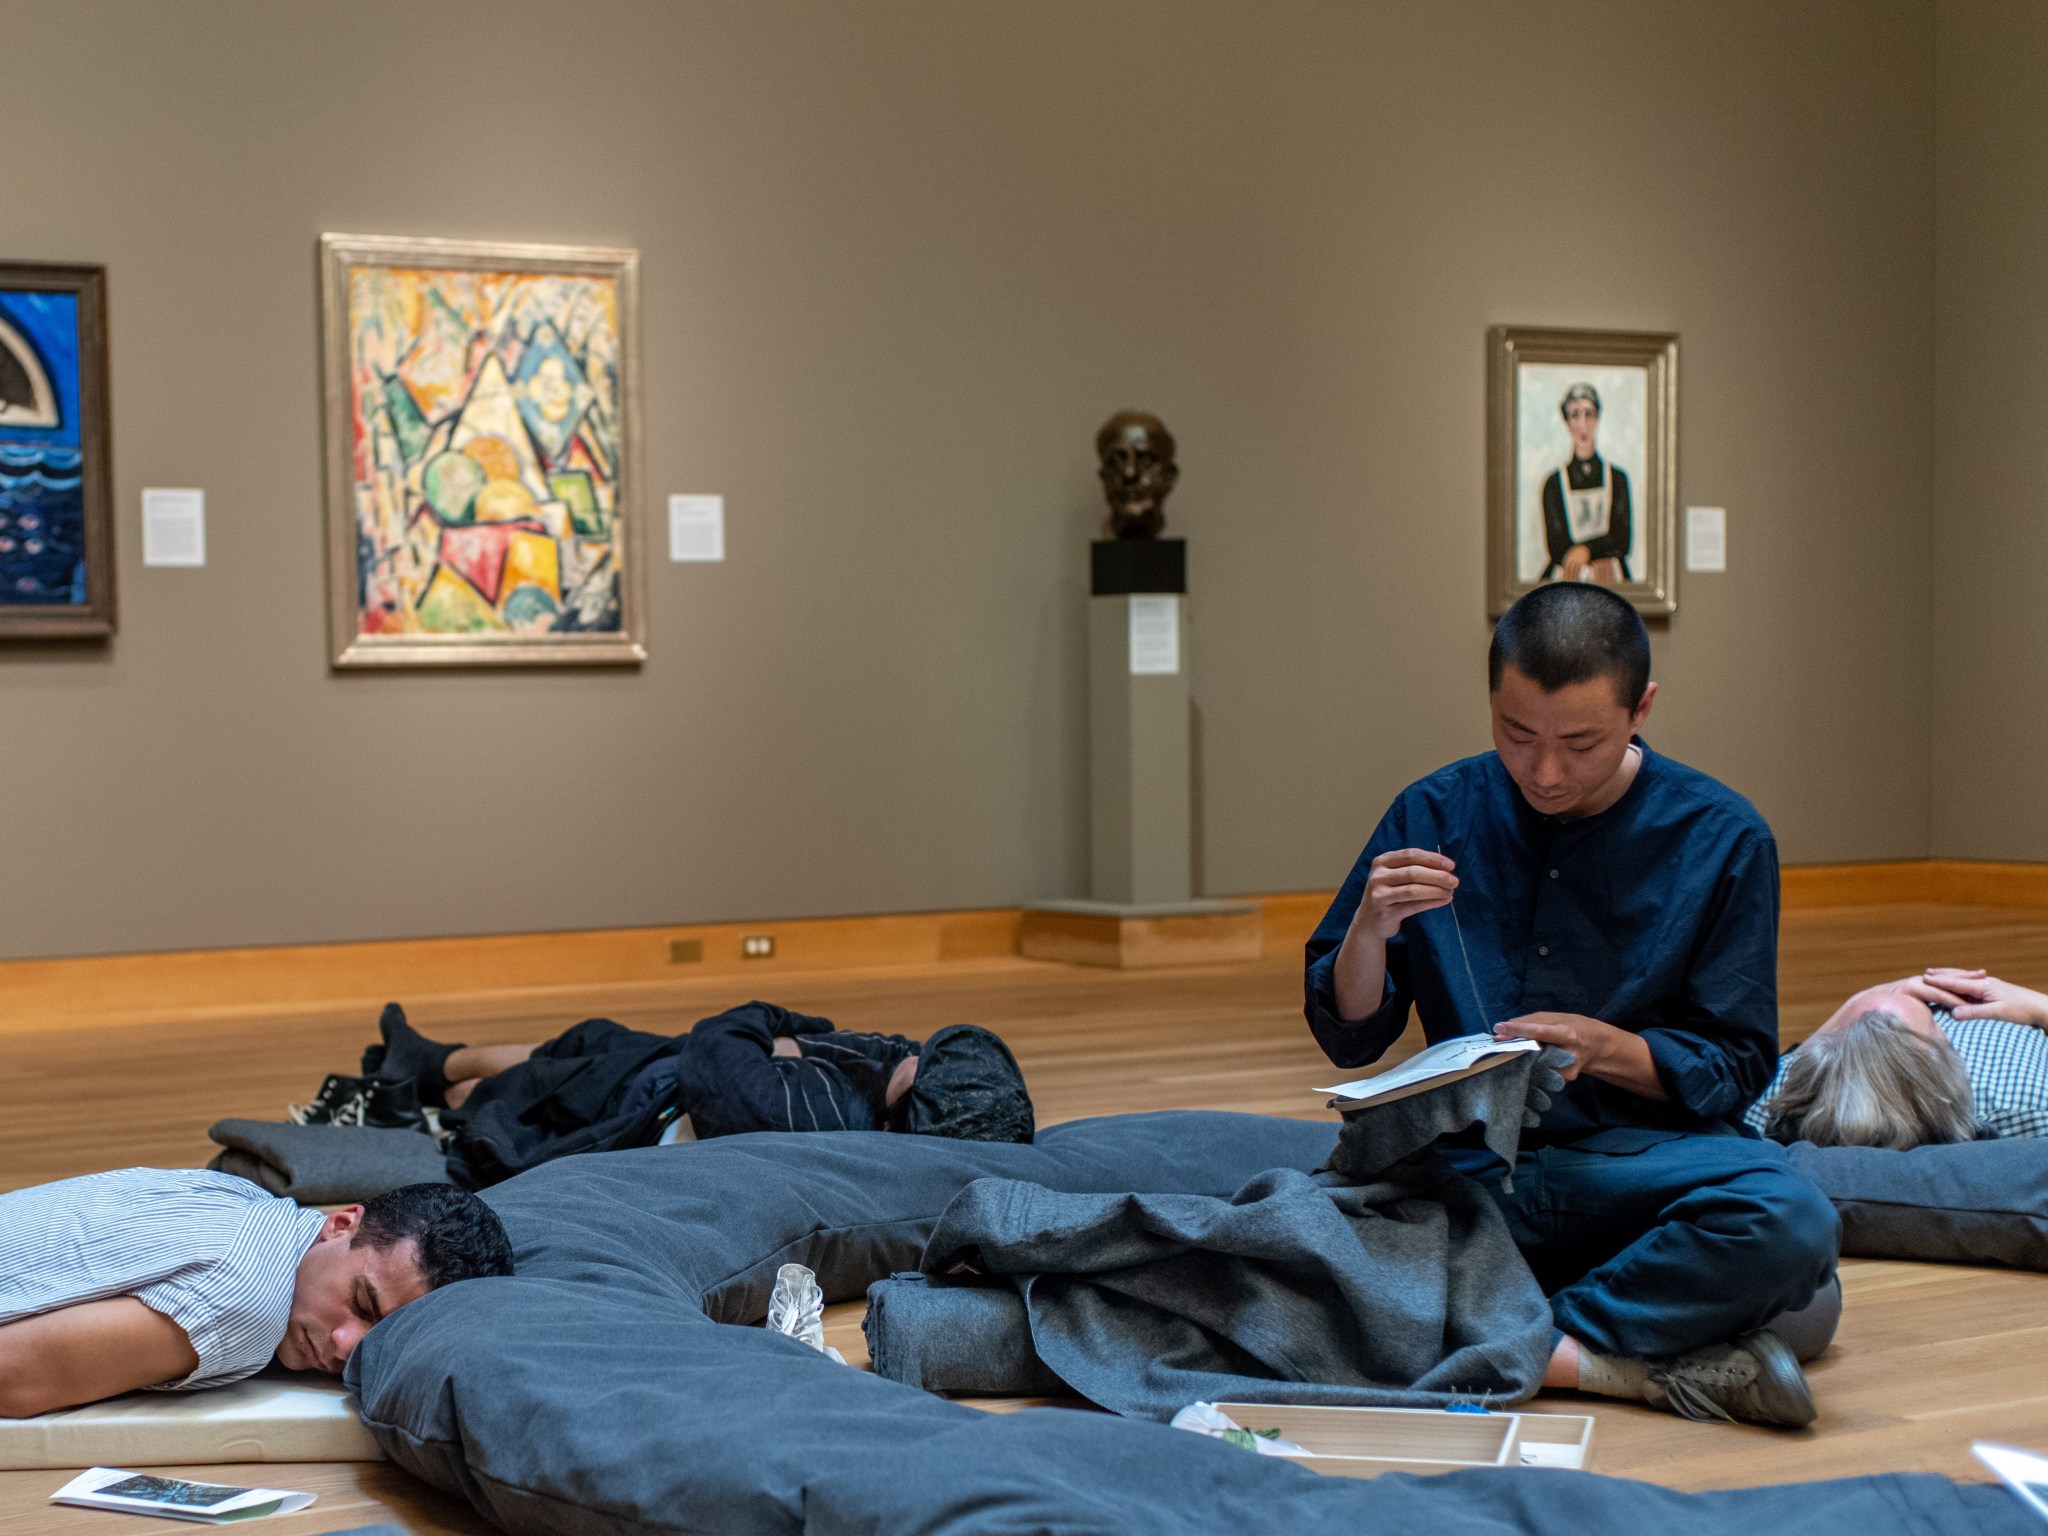 An image of people down on the ground 'napping' in an art gallery.